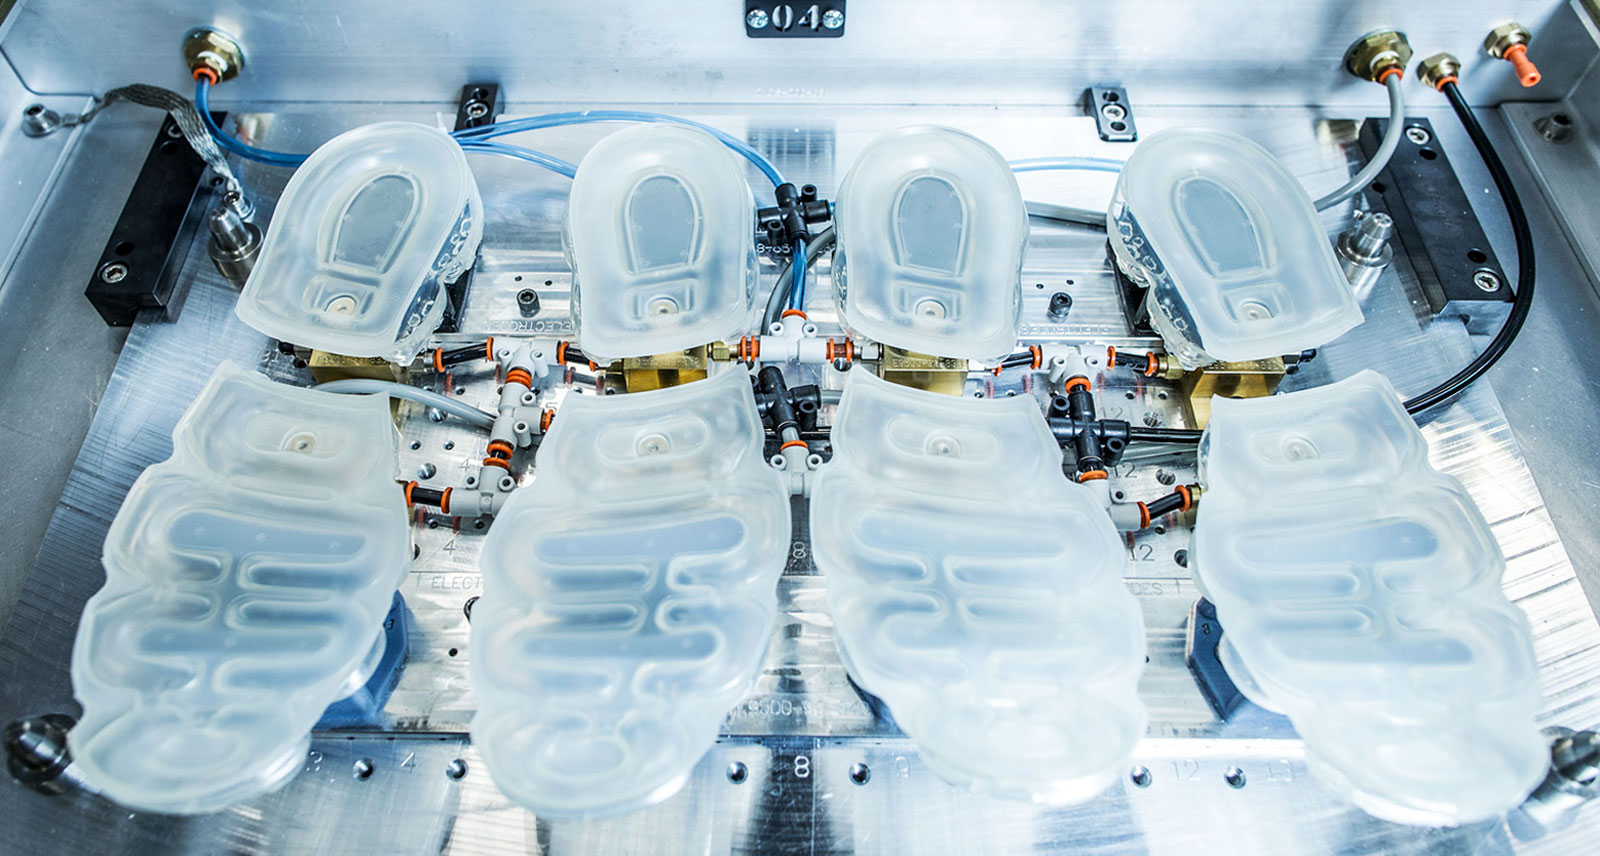 Turn Off Your Brain and Watch How Nike's Latest Sneakers Are Made